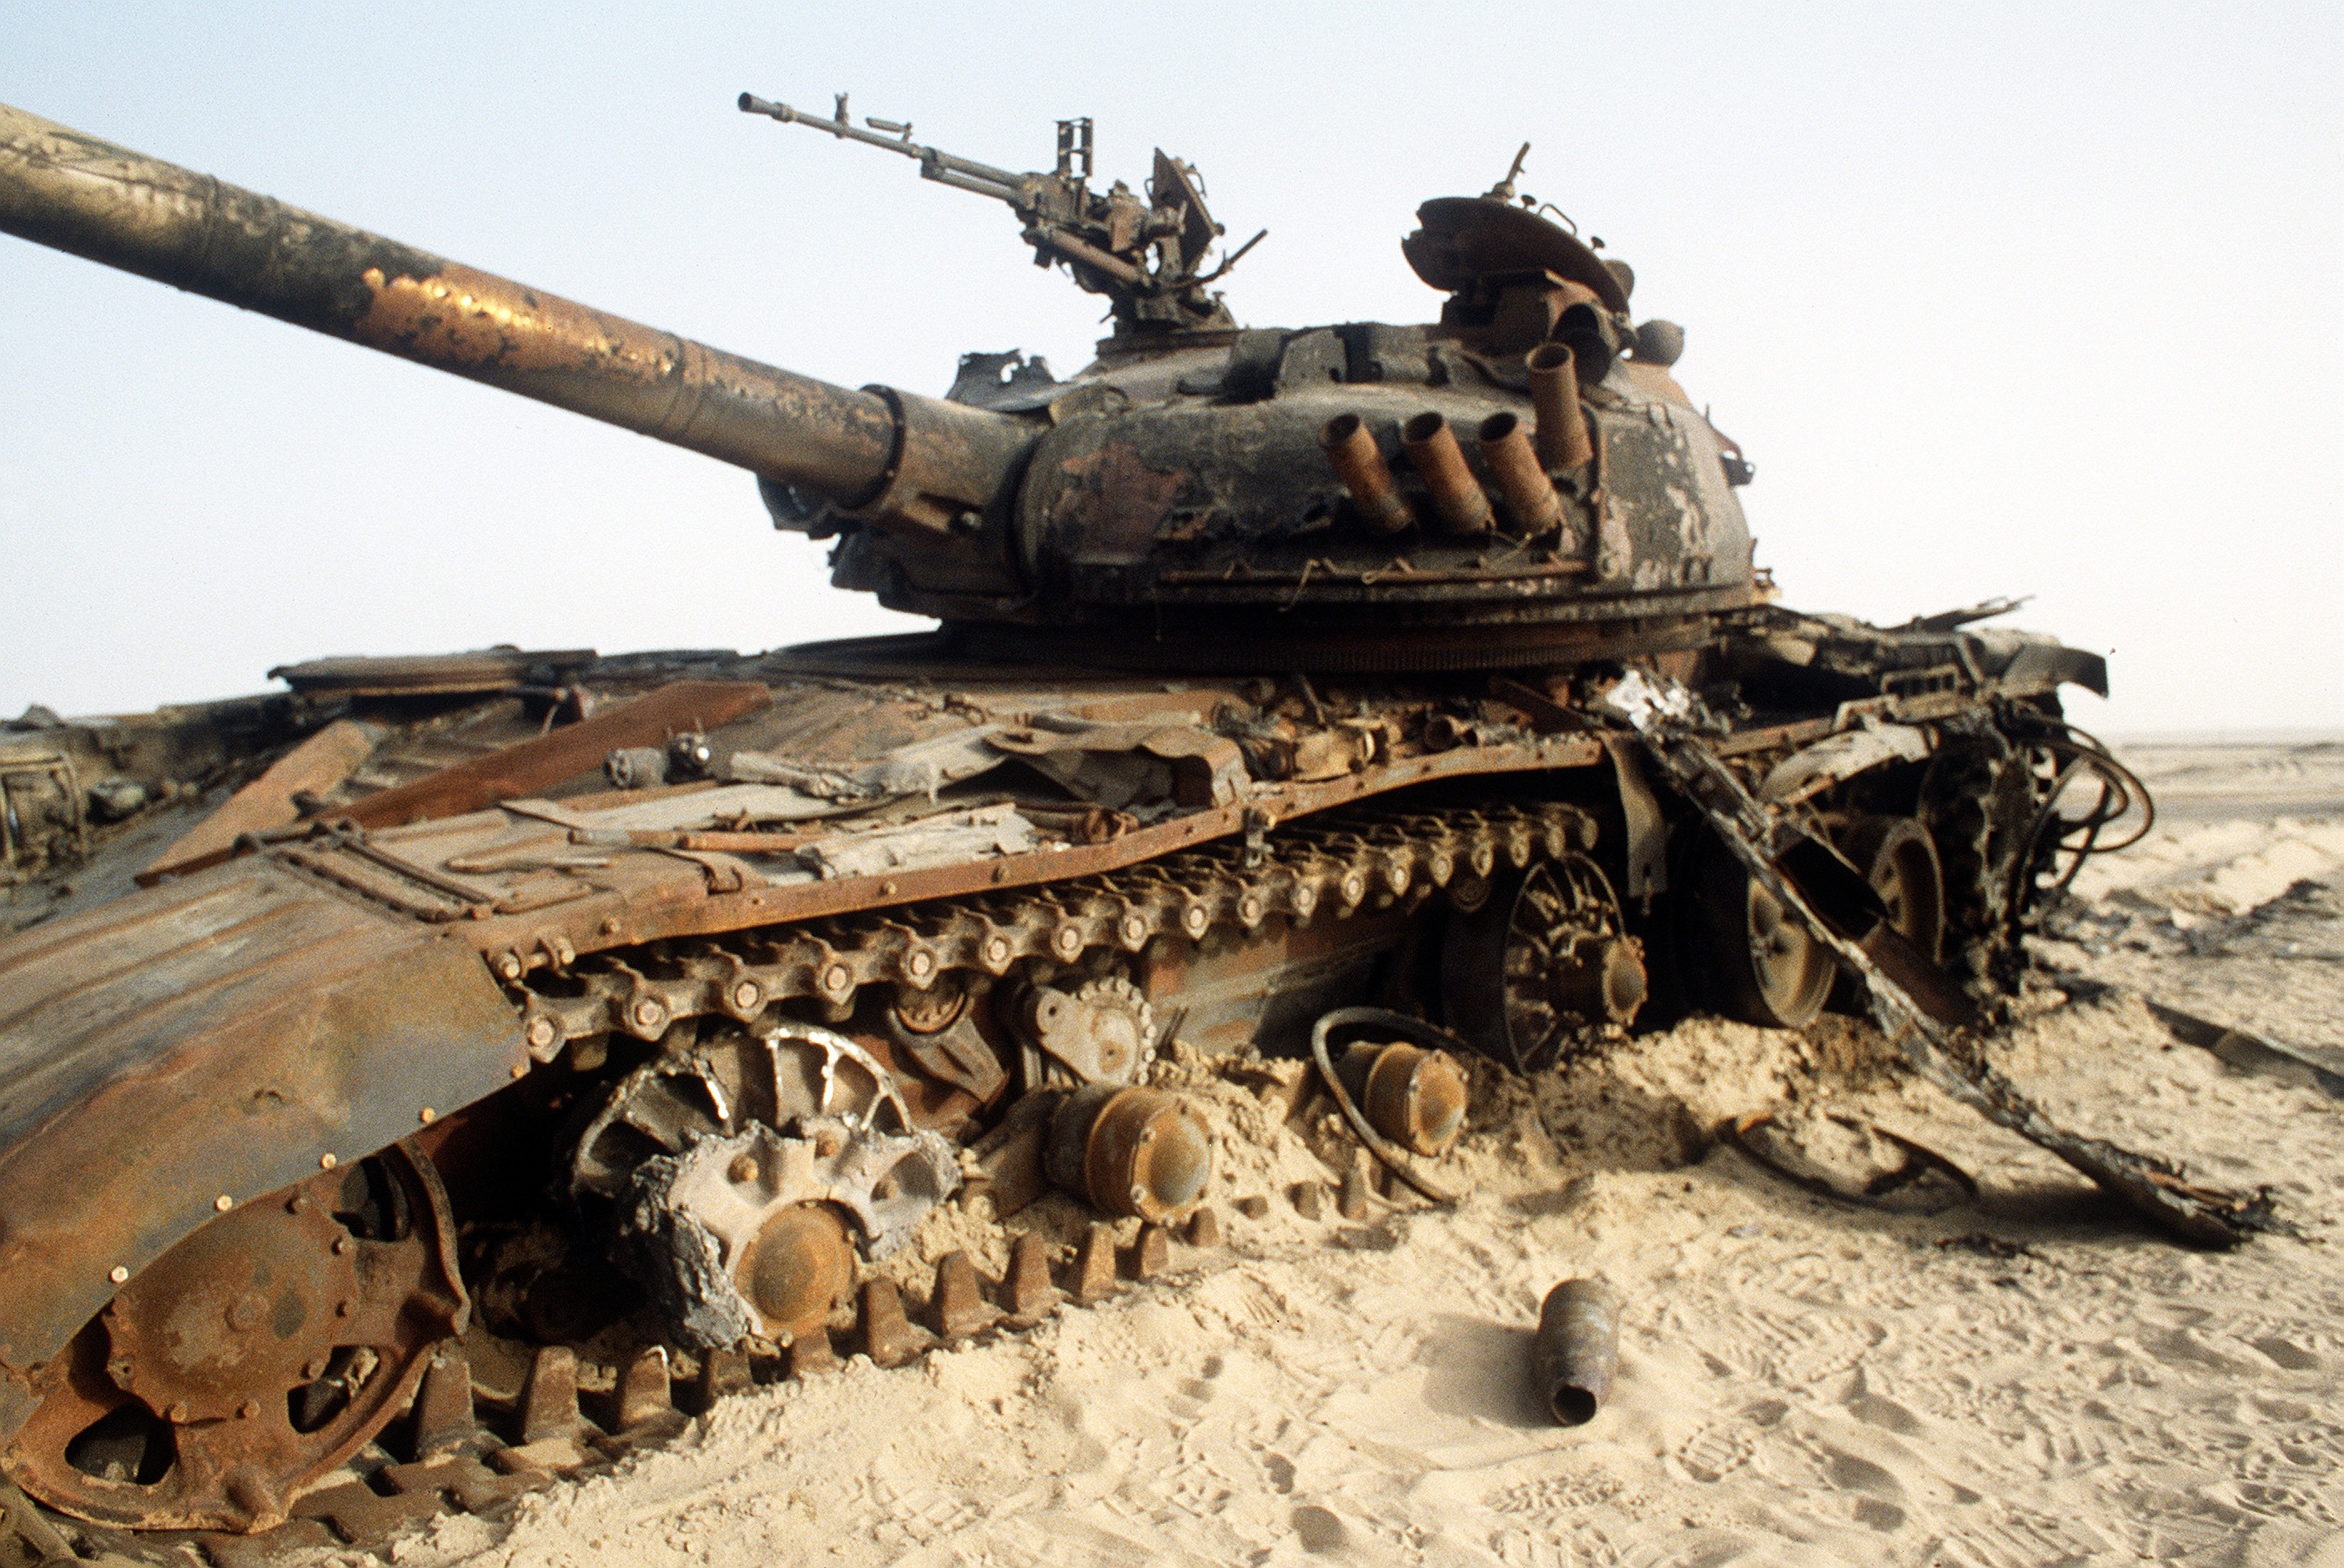 A destroyed Iraqi T-72 main battle tank sits in the desert in the wake of advancing coalition forces during Operation Desert Storm.